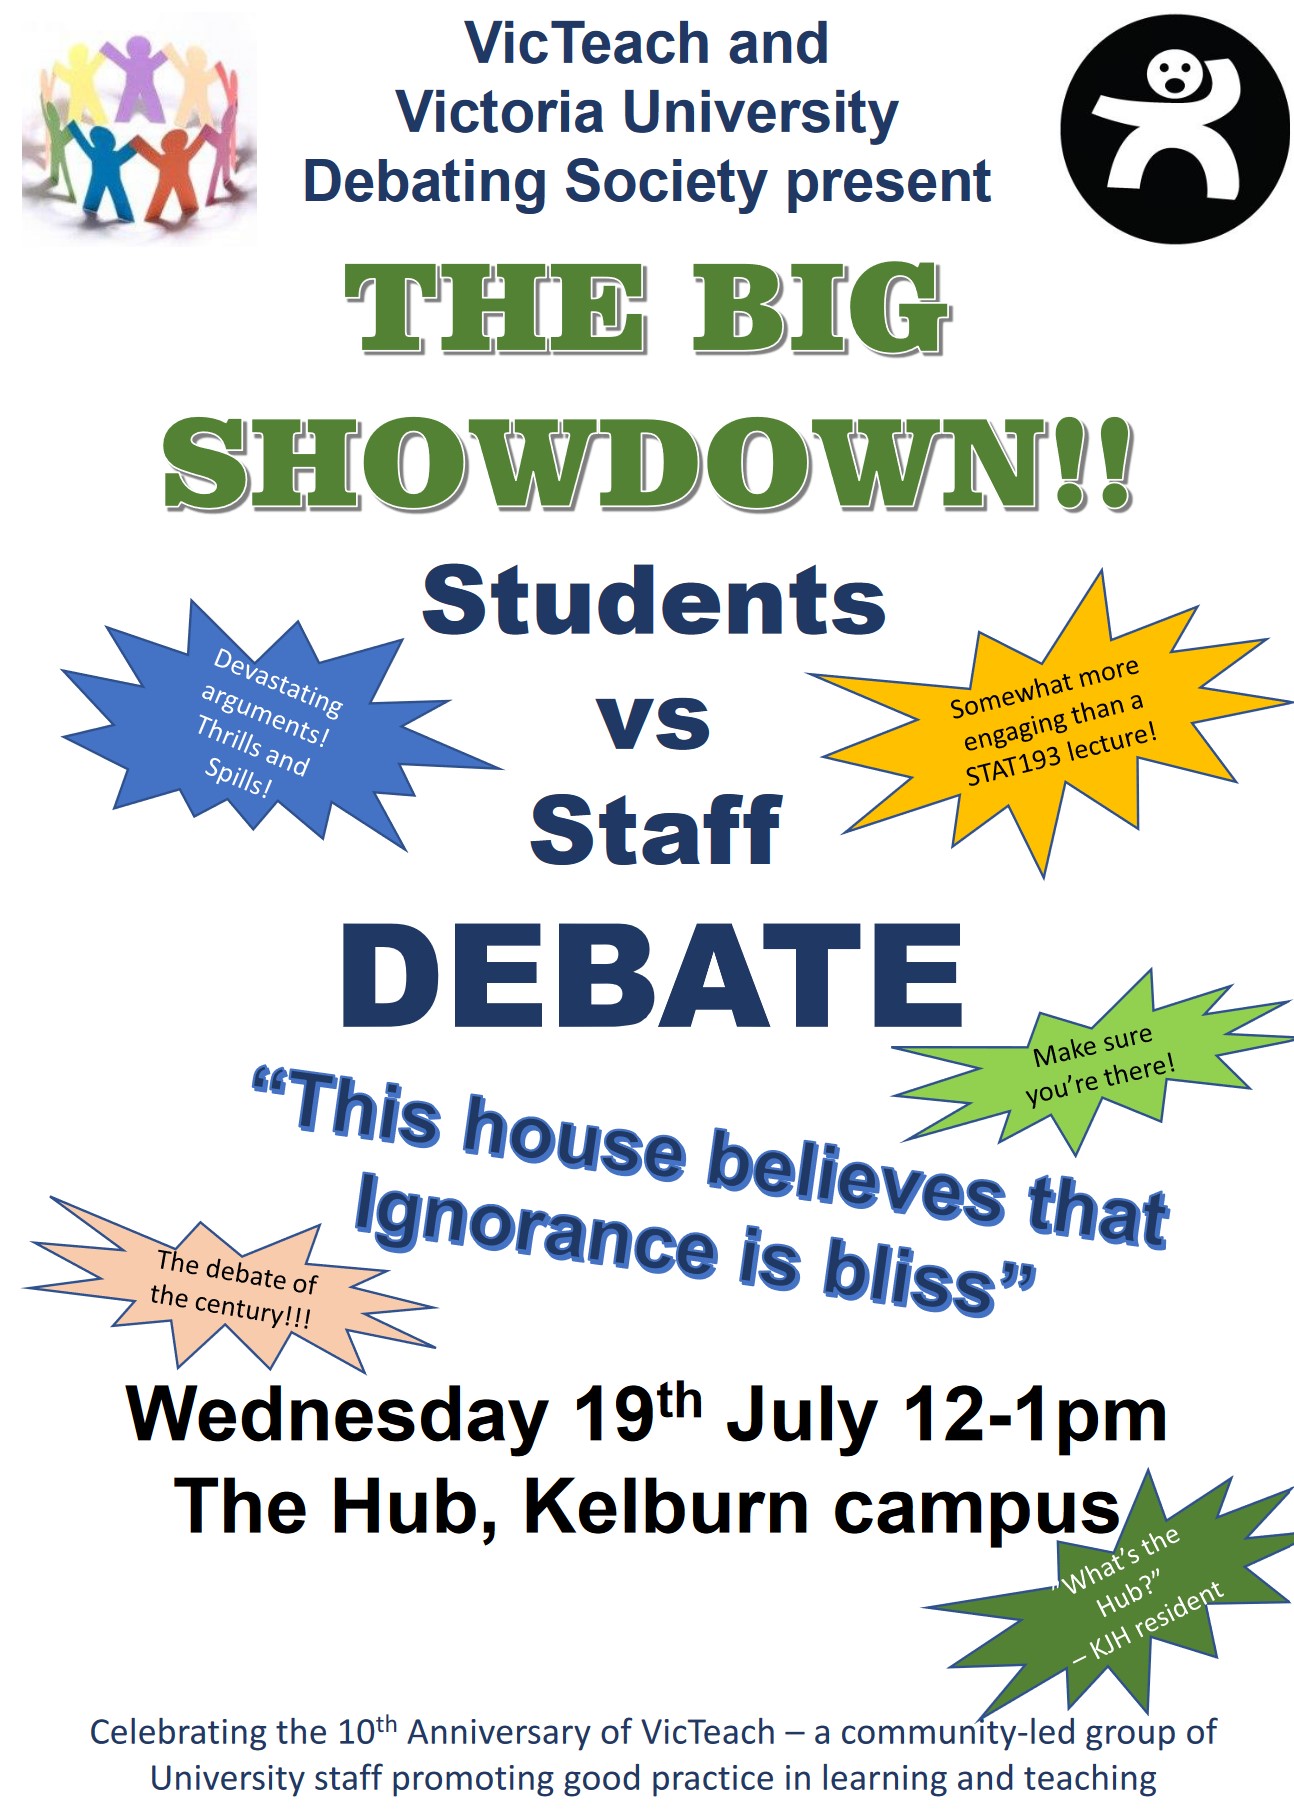 Debate poster indicating time and location of the event